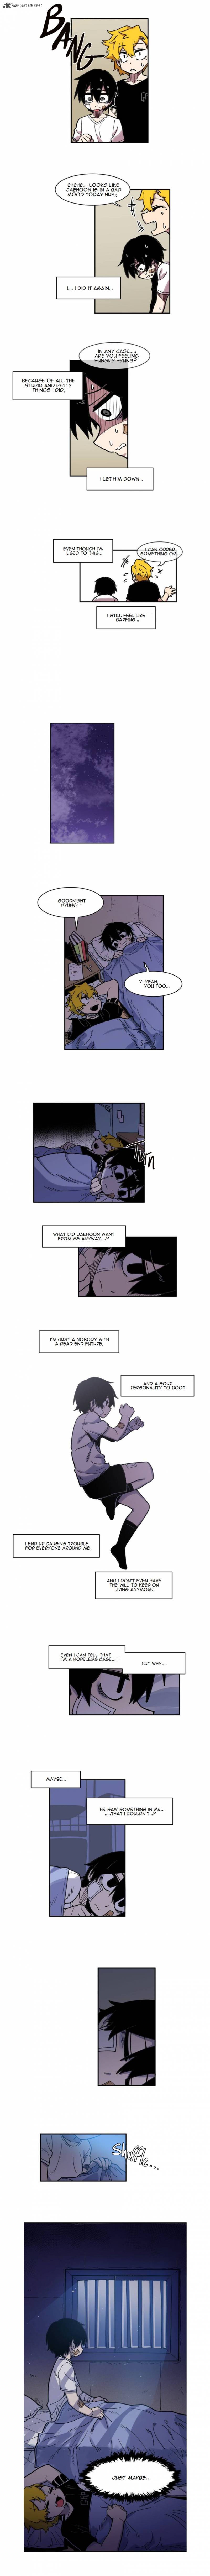 Suicide Boy Chapter 26 Page 2